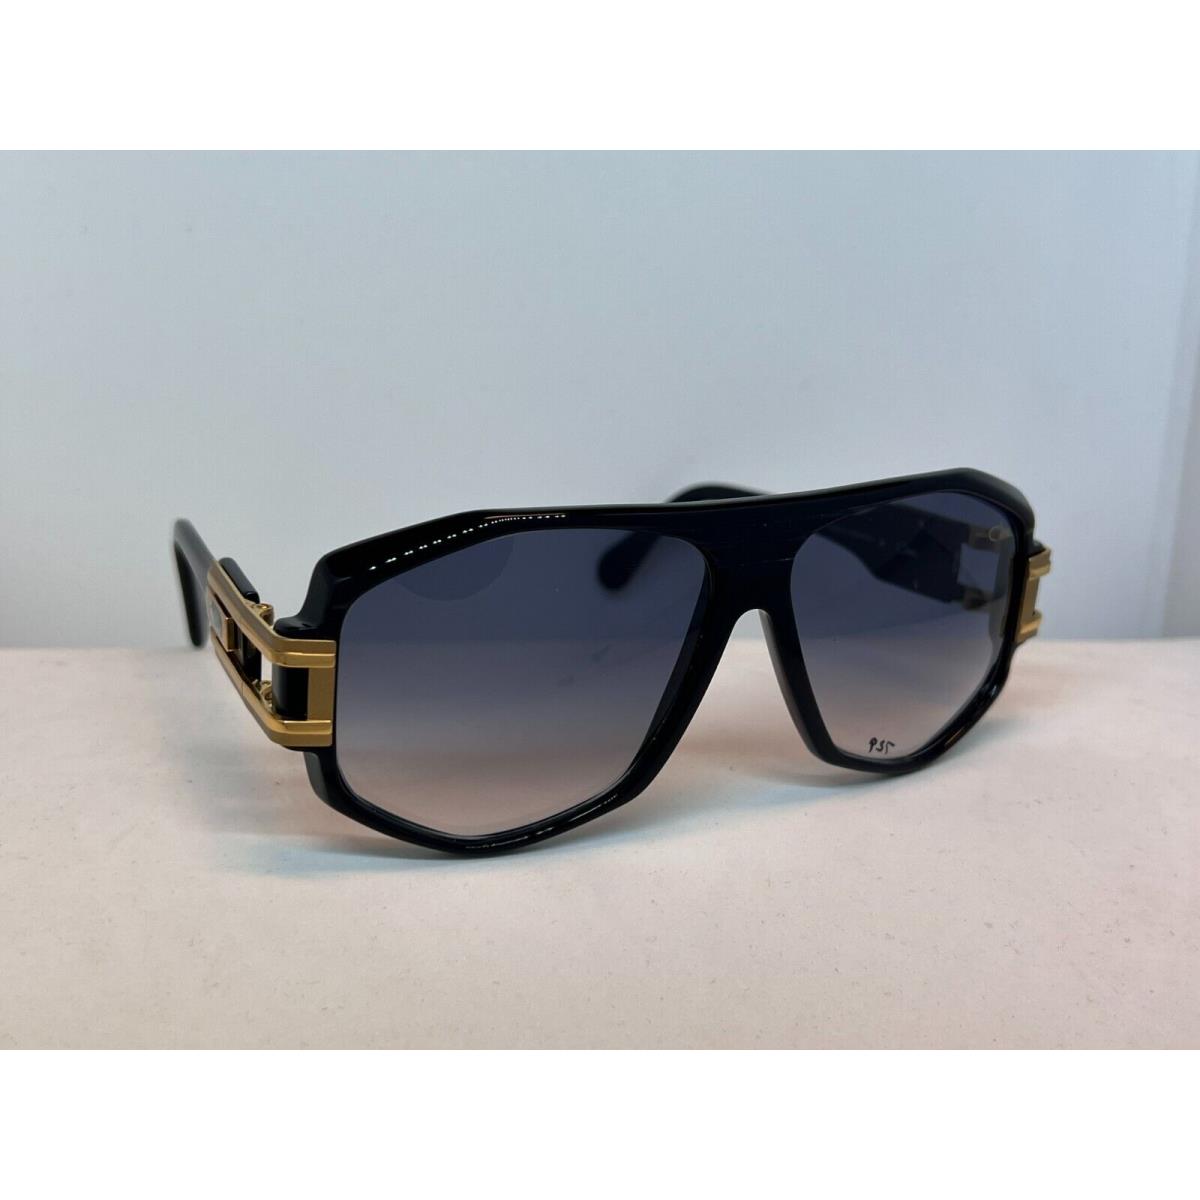 Cazal Legends Mod 163 Col 1 Black Gold Sunglasses Made IN Germany ...